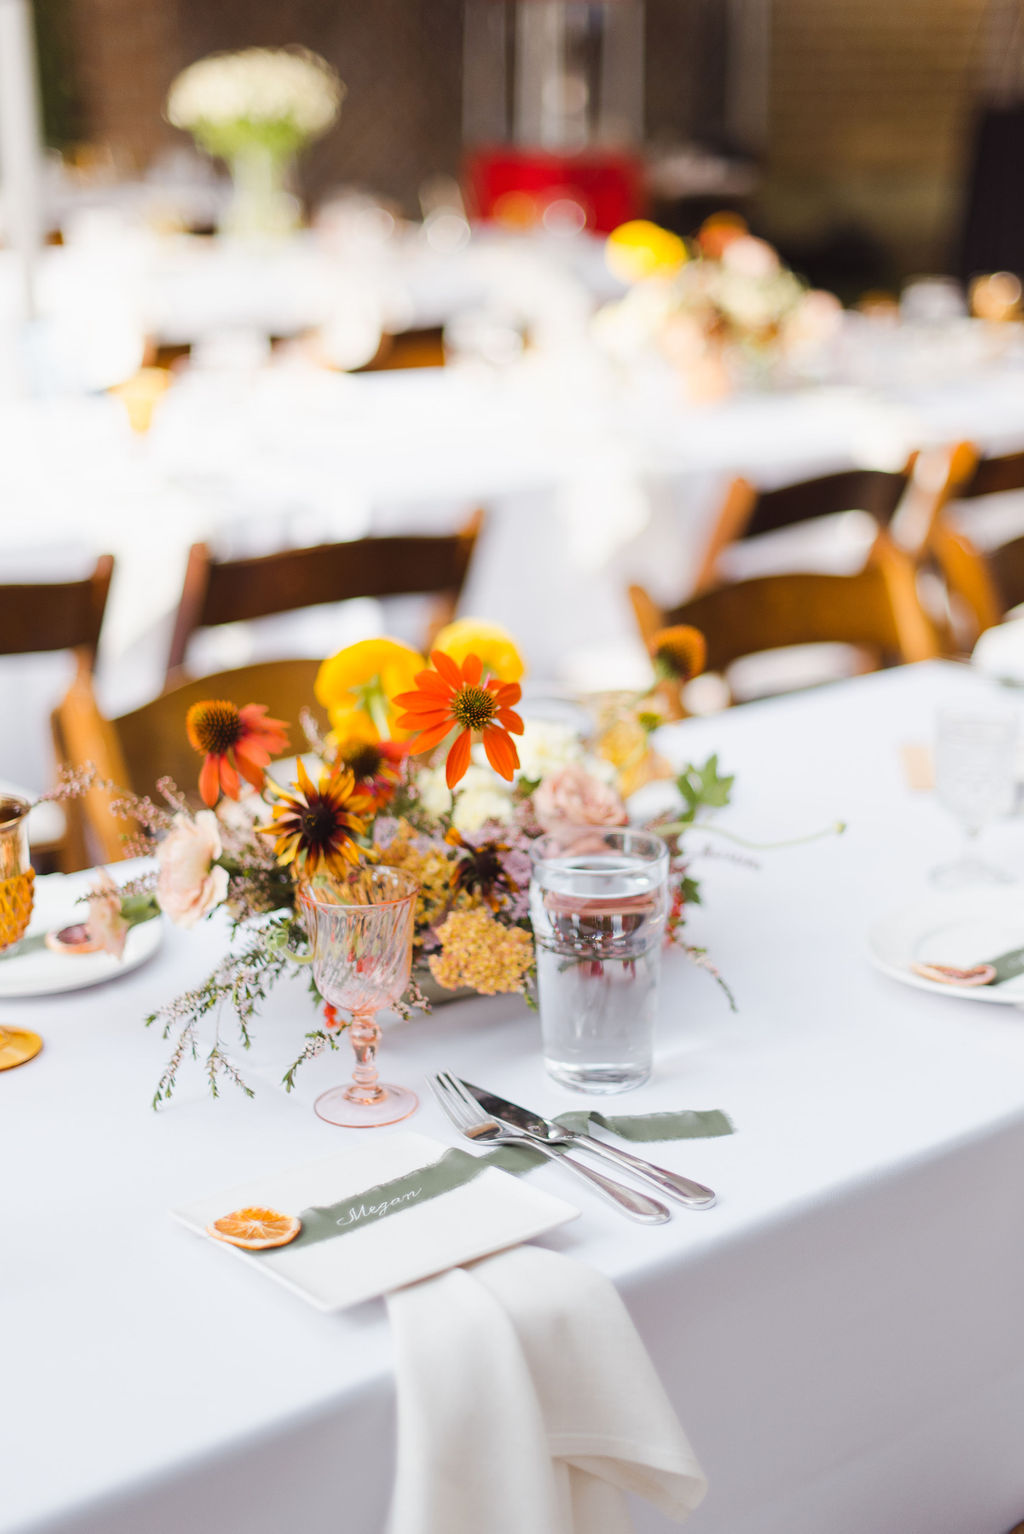 Bright orange whimsical wedding flowers photographed against an Italian inspired tablescape for a Calgary Alberta wedding